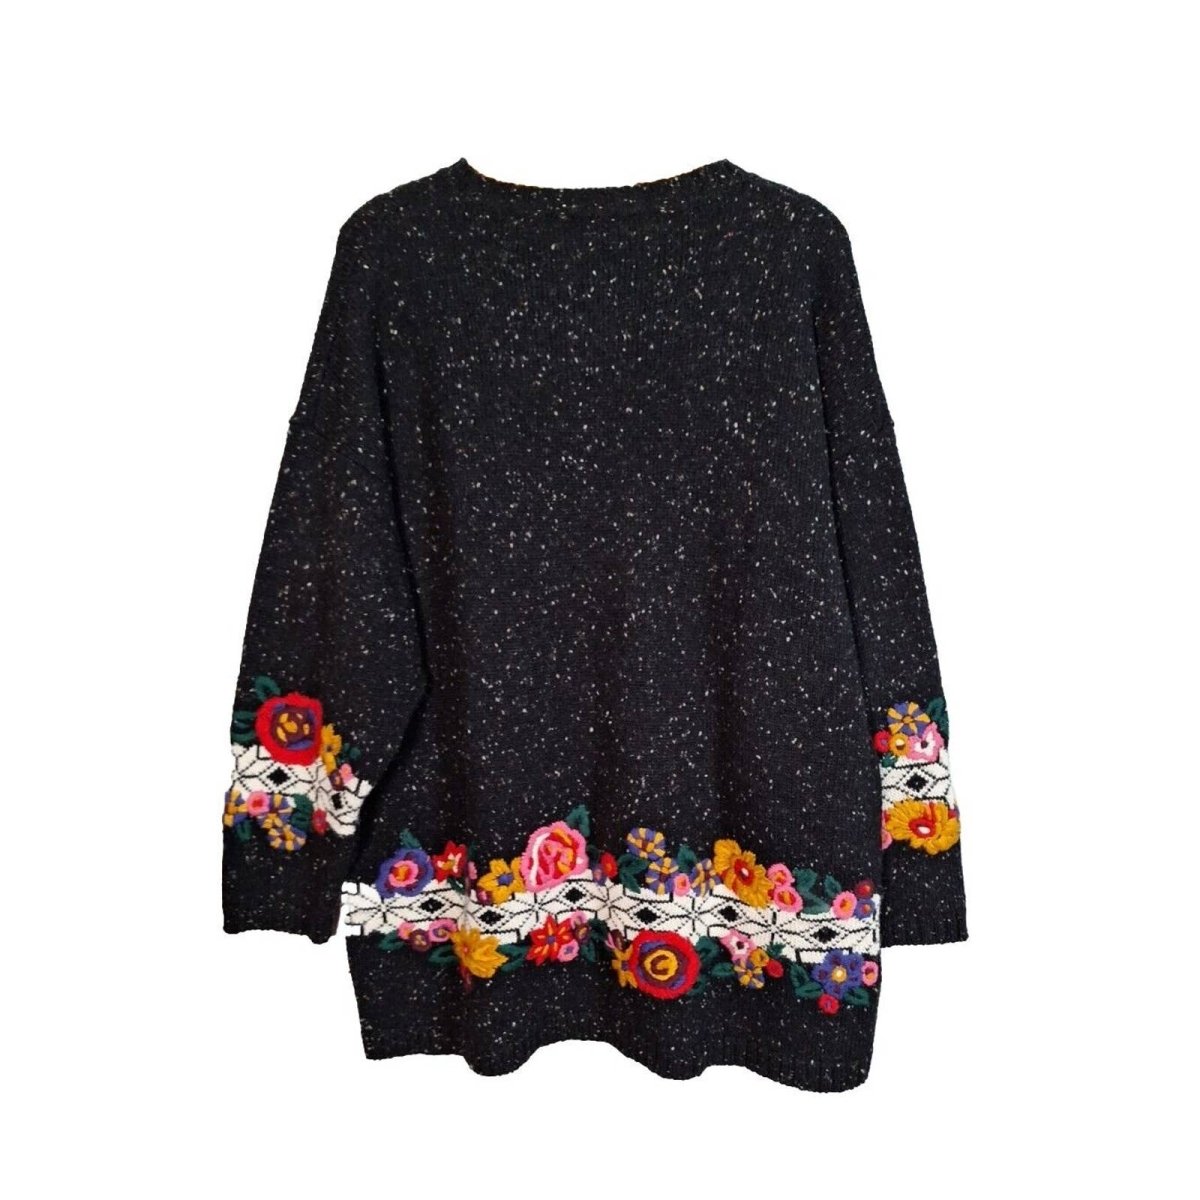 Vintage 80s/90s Black Floral Embridered Sweater Women's Size L/XL Chest 50" - themallvintage The Mall Vintage